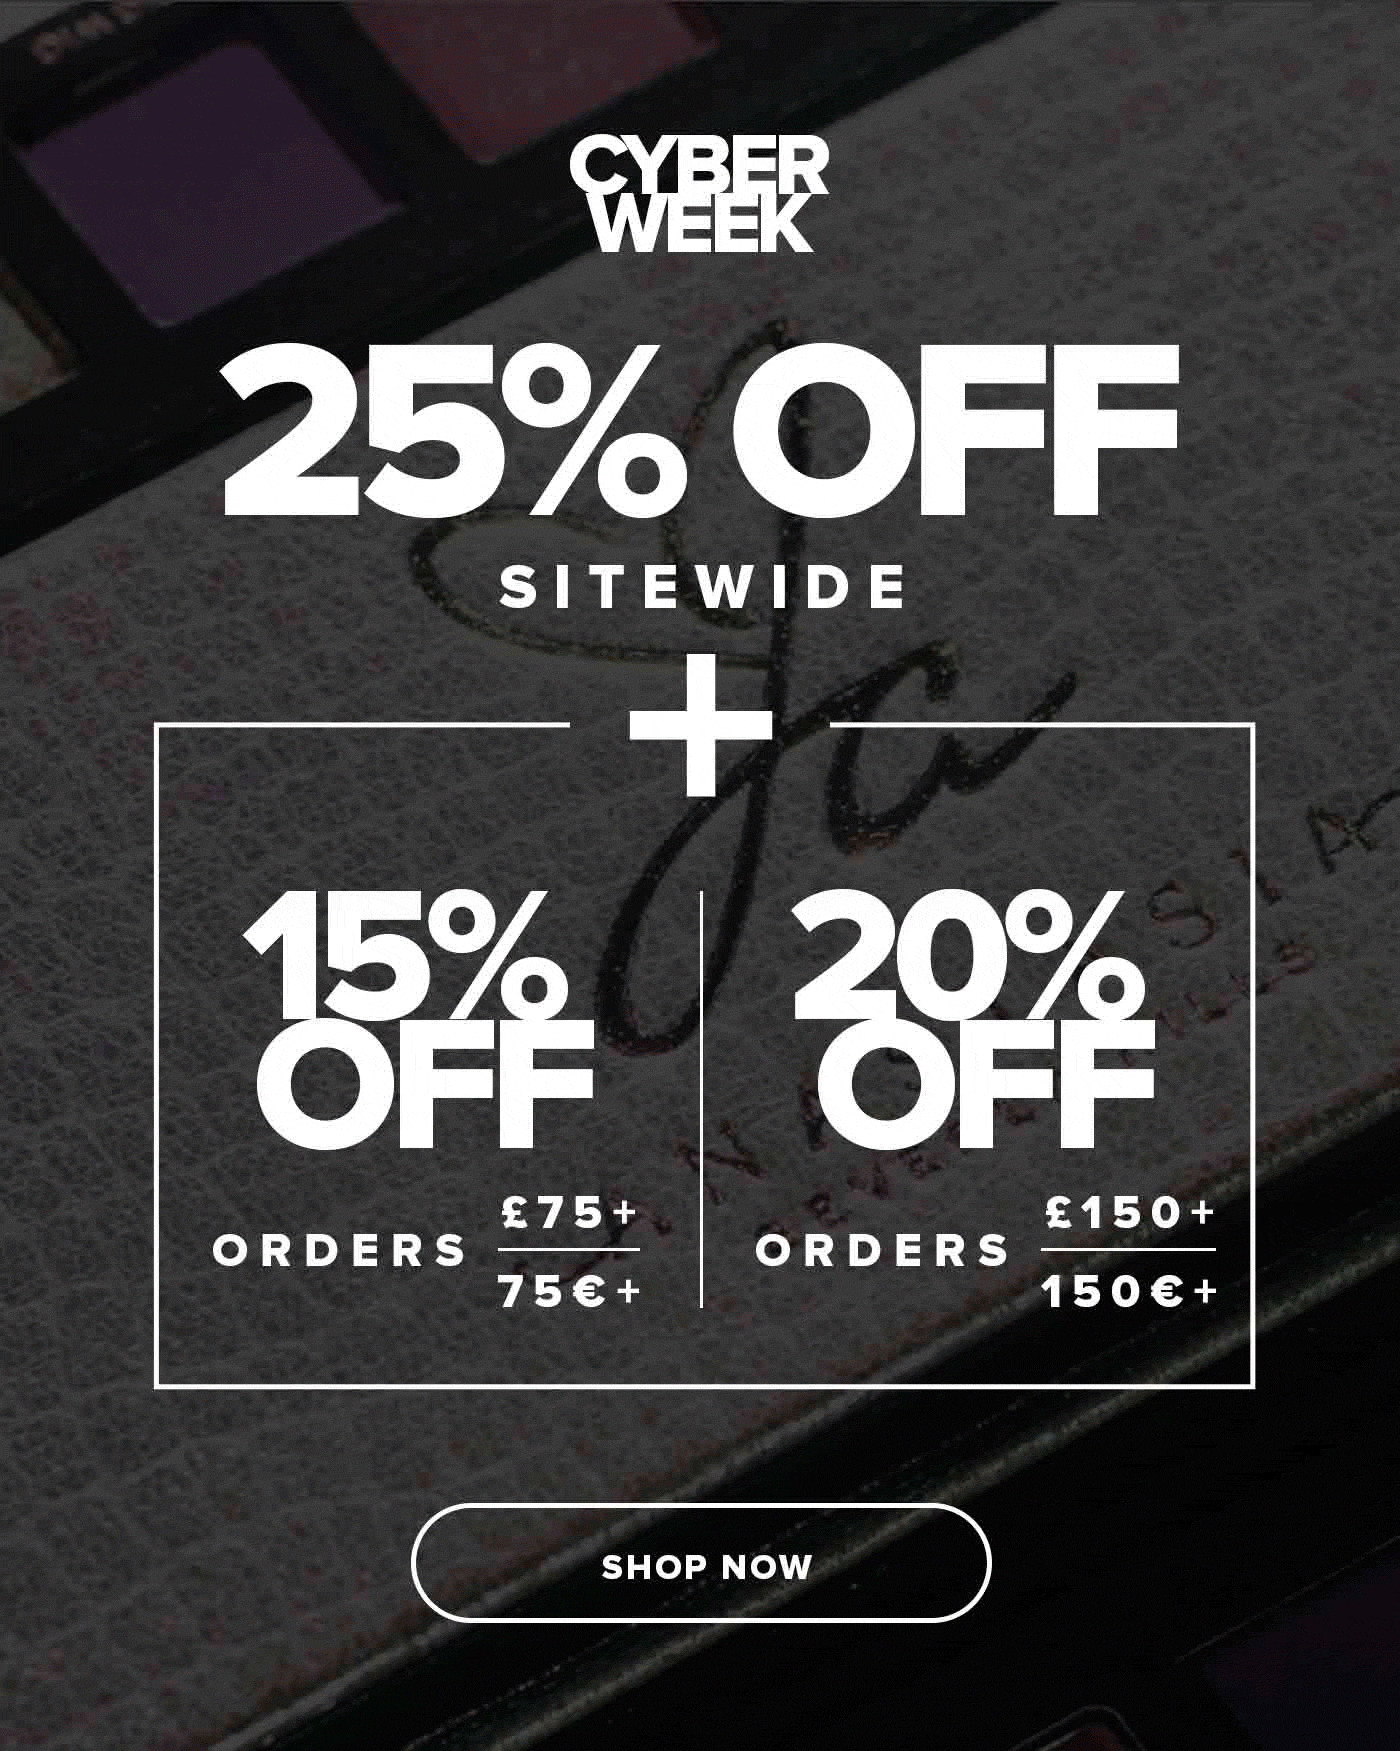 25% Off Sitewide + Buy More to Save More